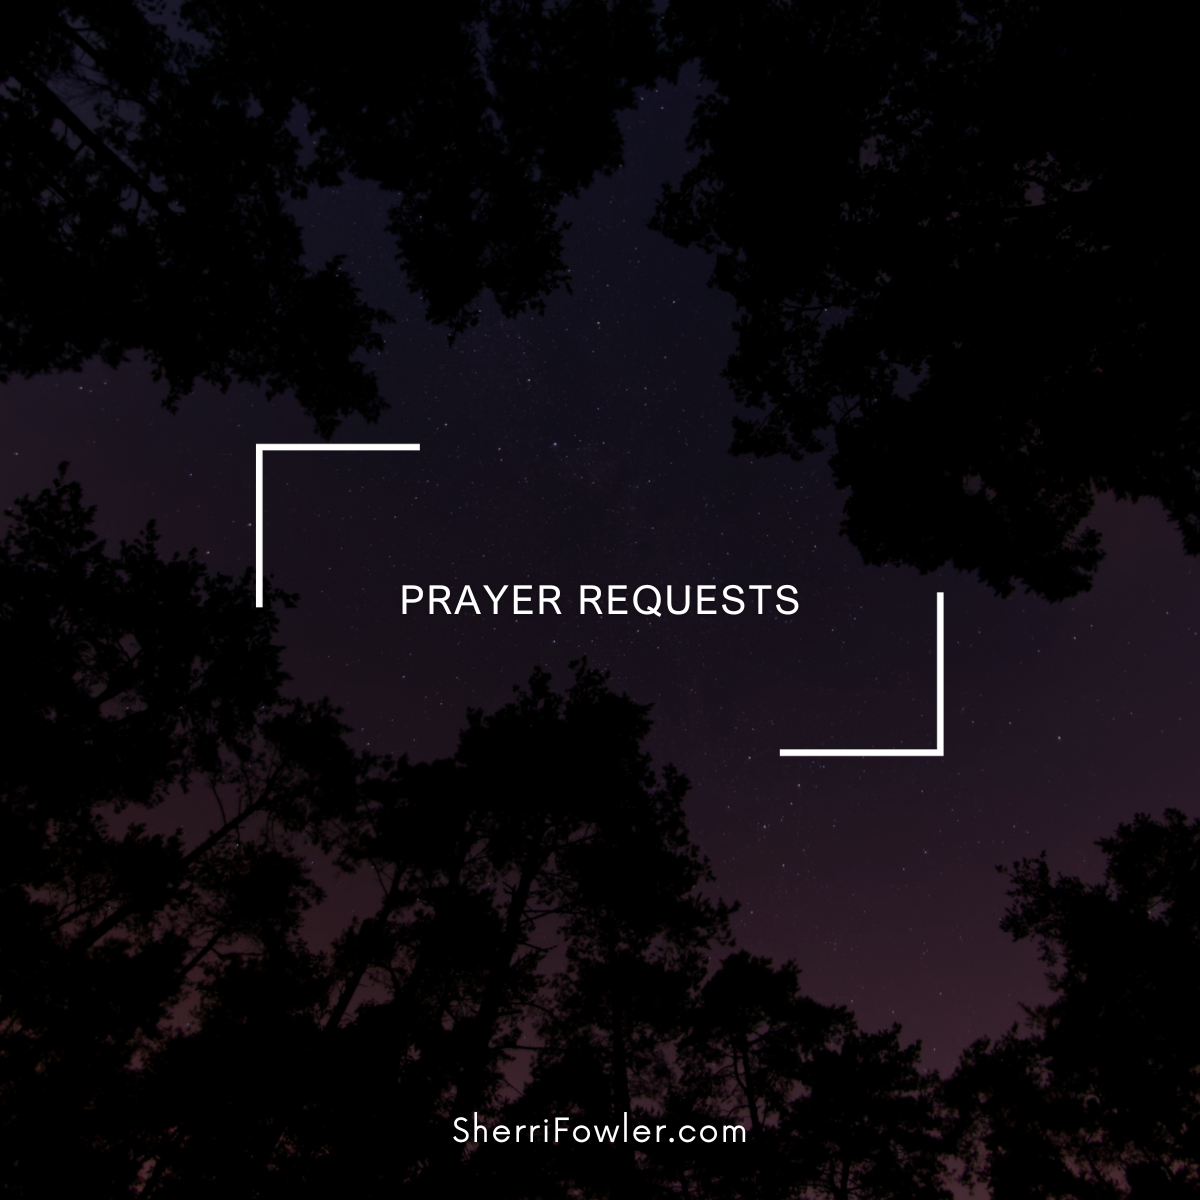 As children of God we are asked by our Heavenly Father to pray for one another. Please let me know how I can pray for you. Submit prayer requests at SherriFowler.com